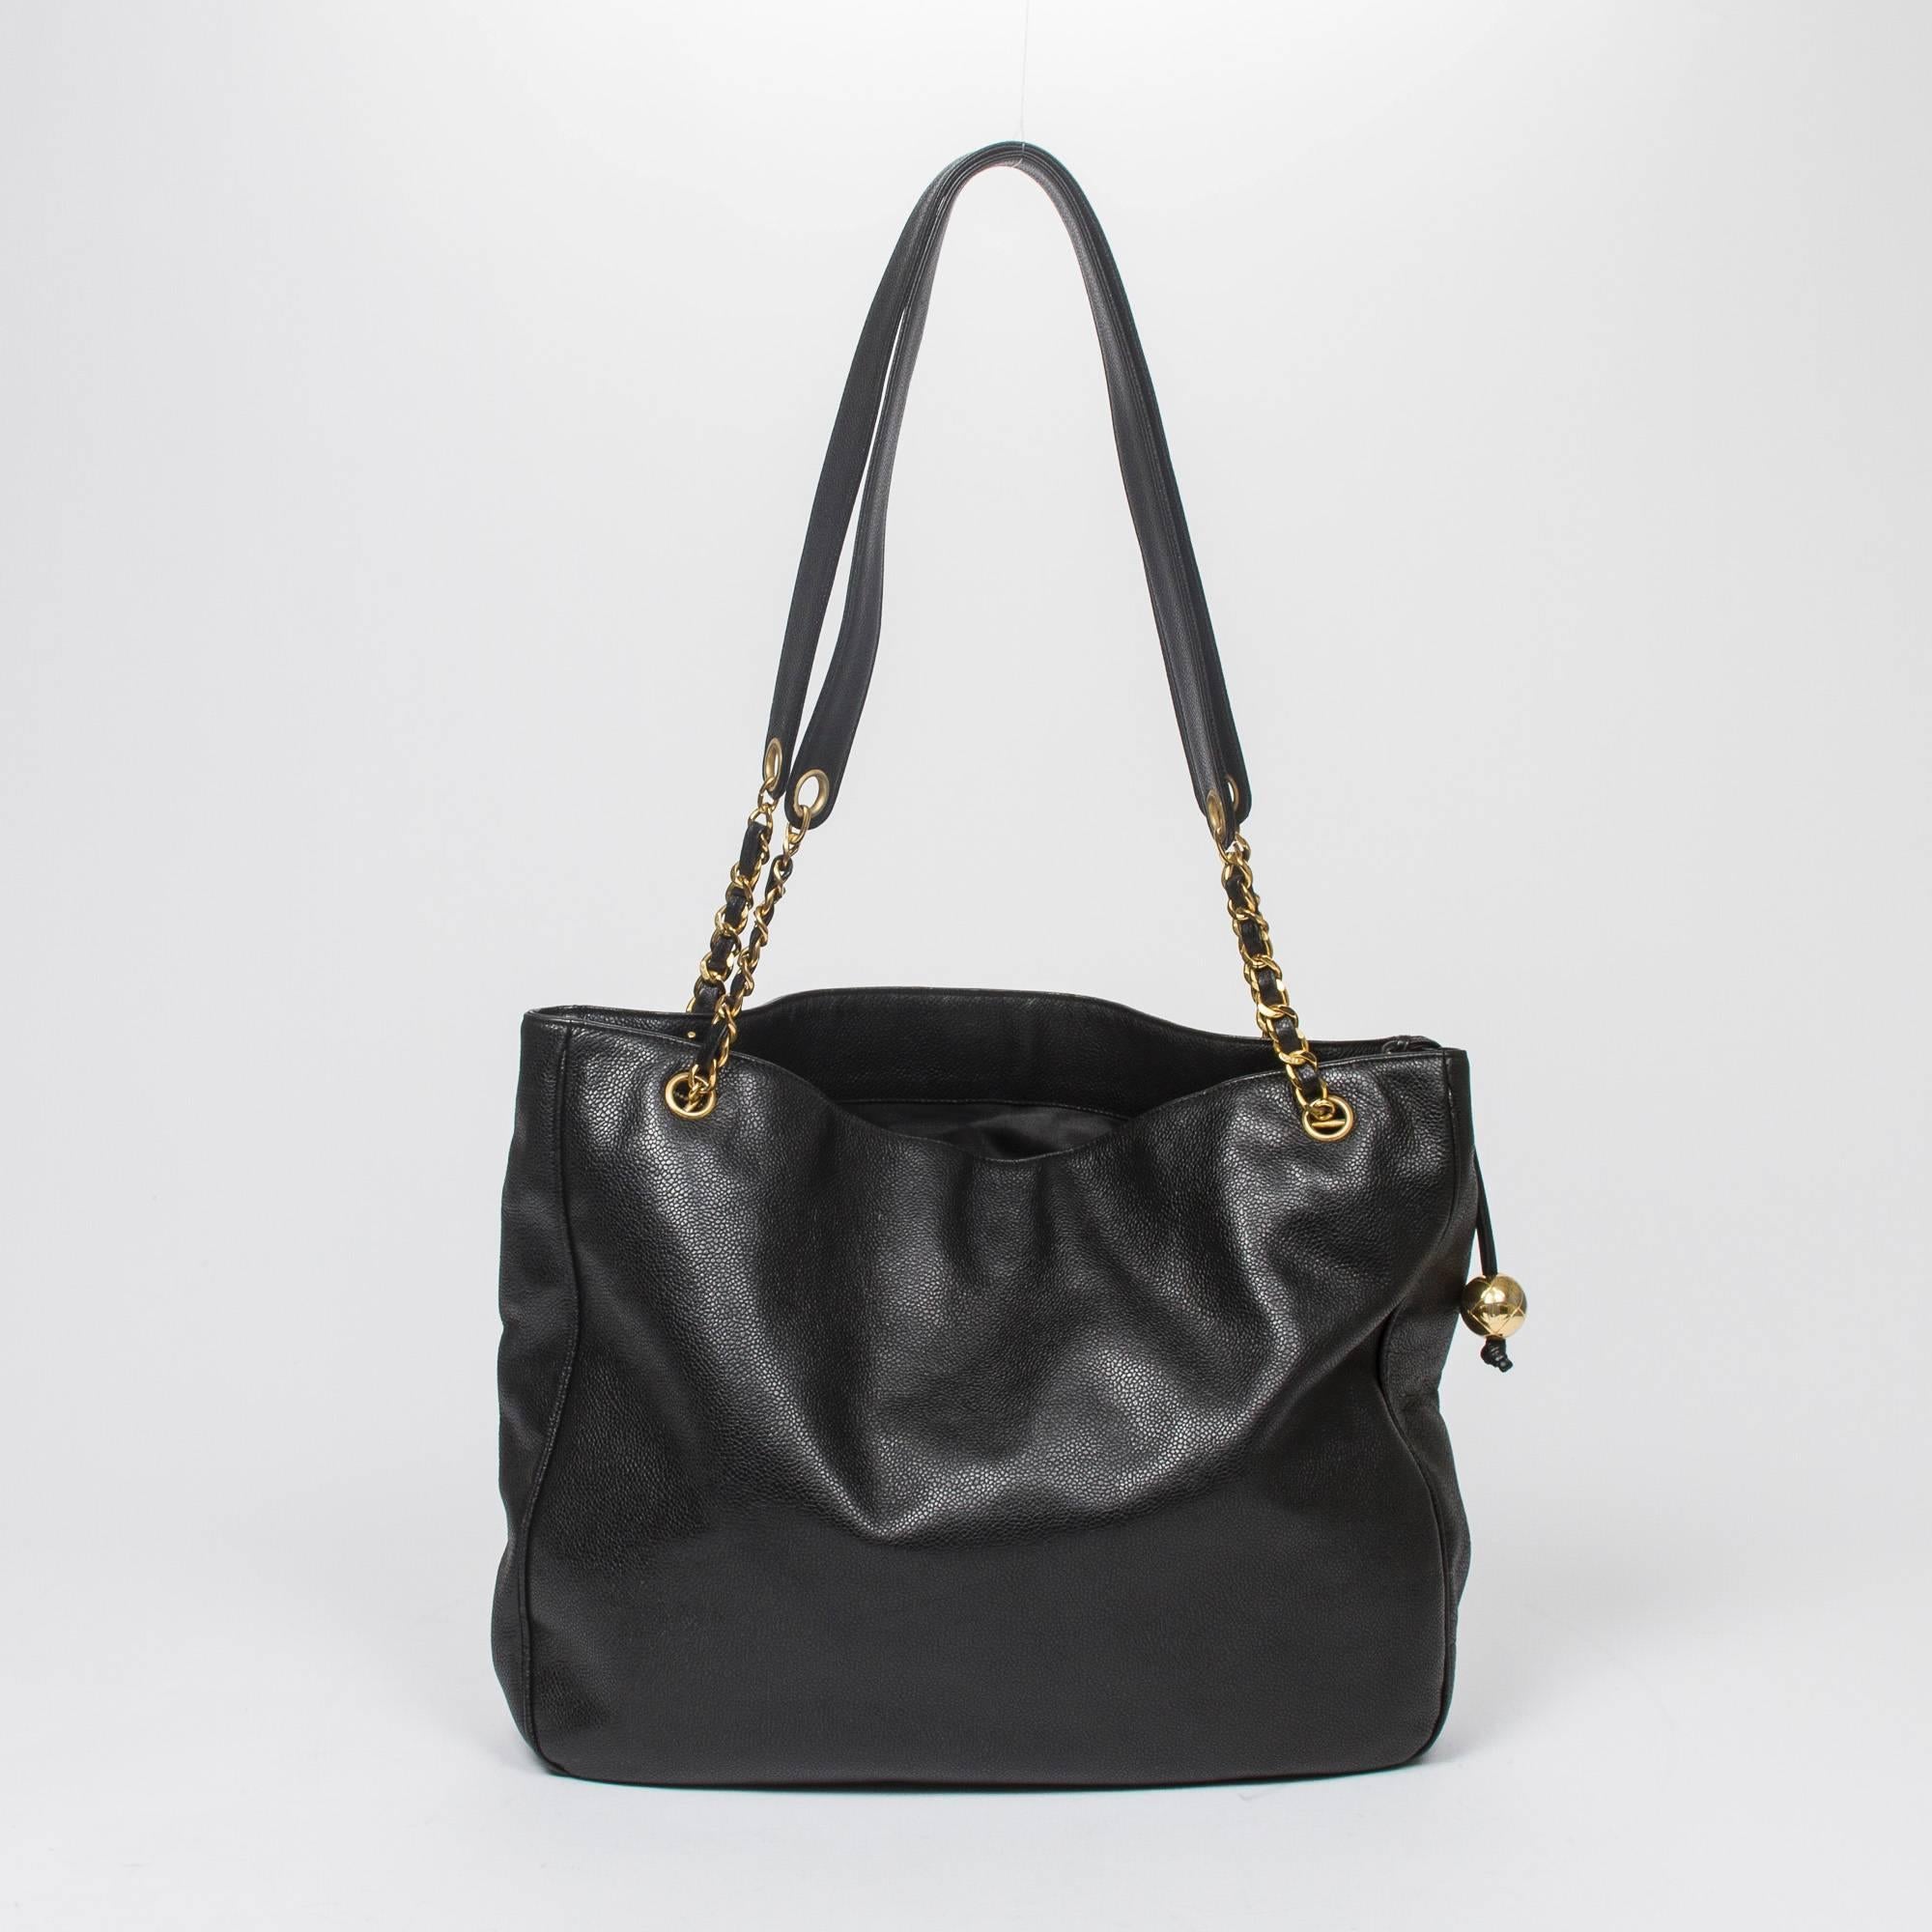 Chanel - Vintage Large Tote Black Caviar Leather 1